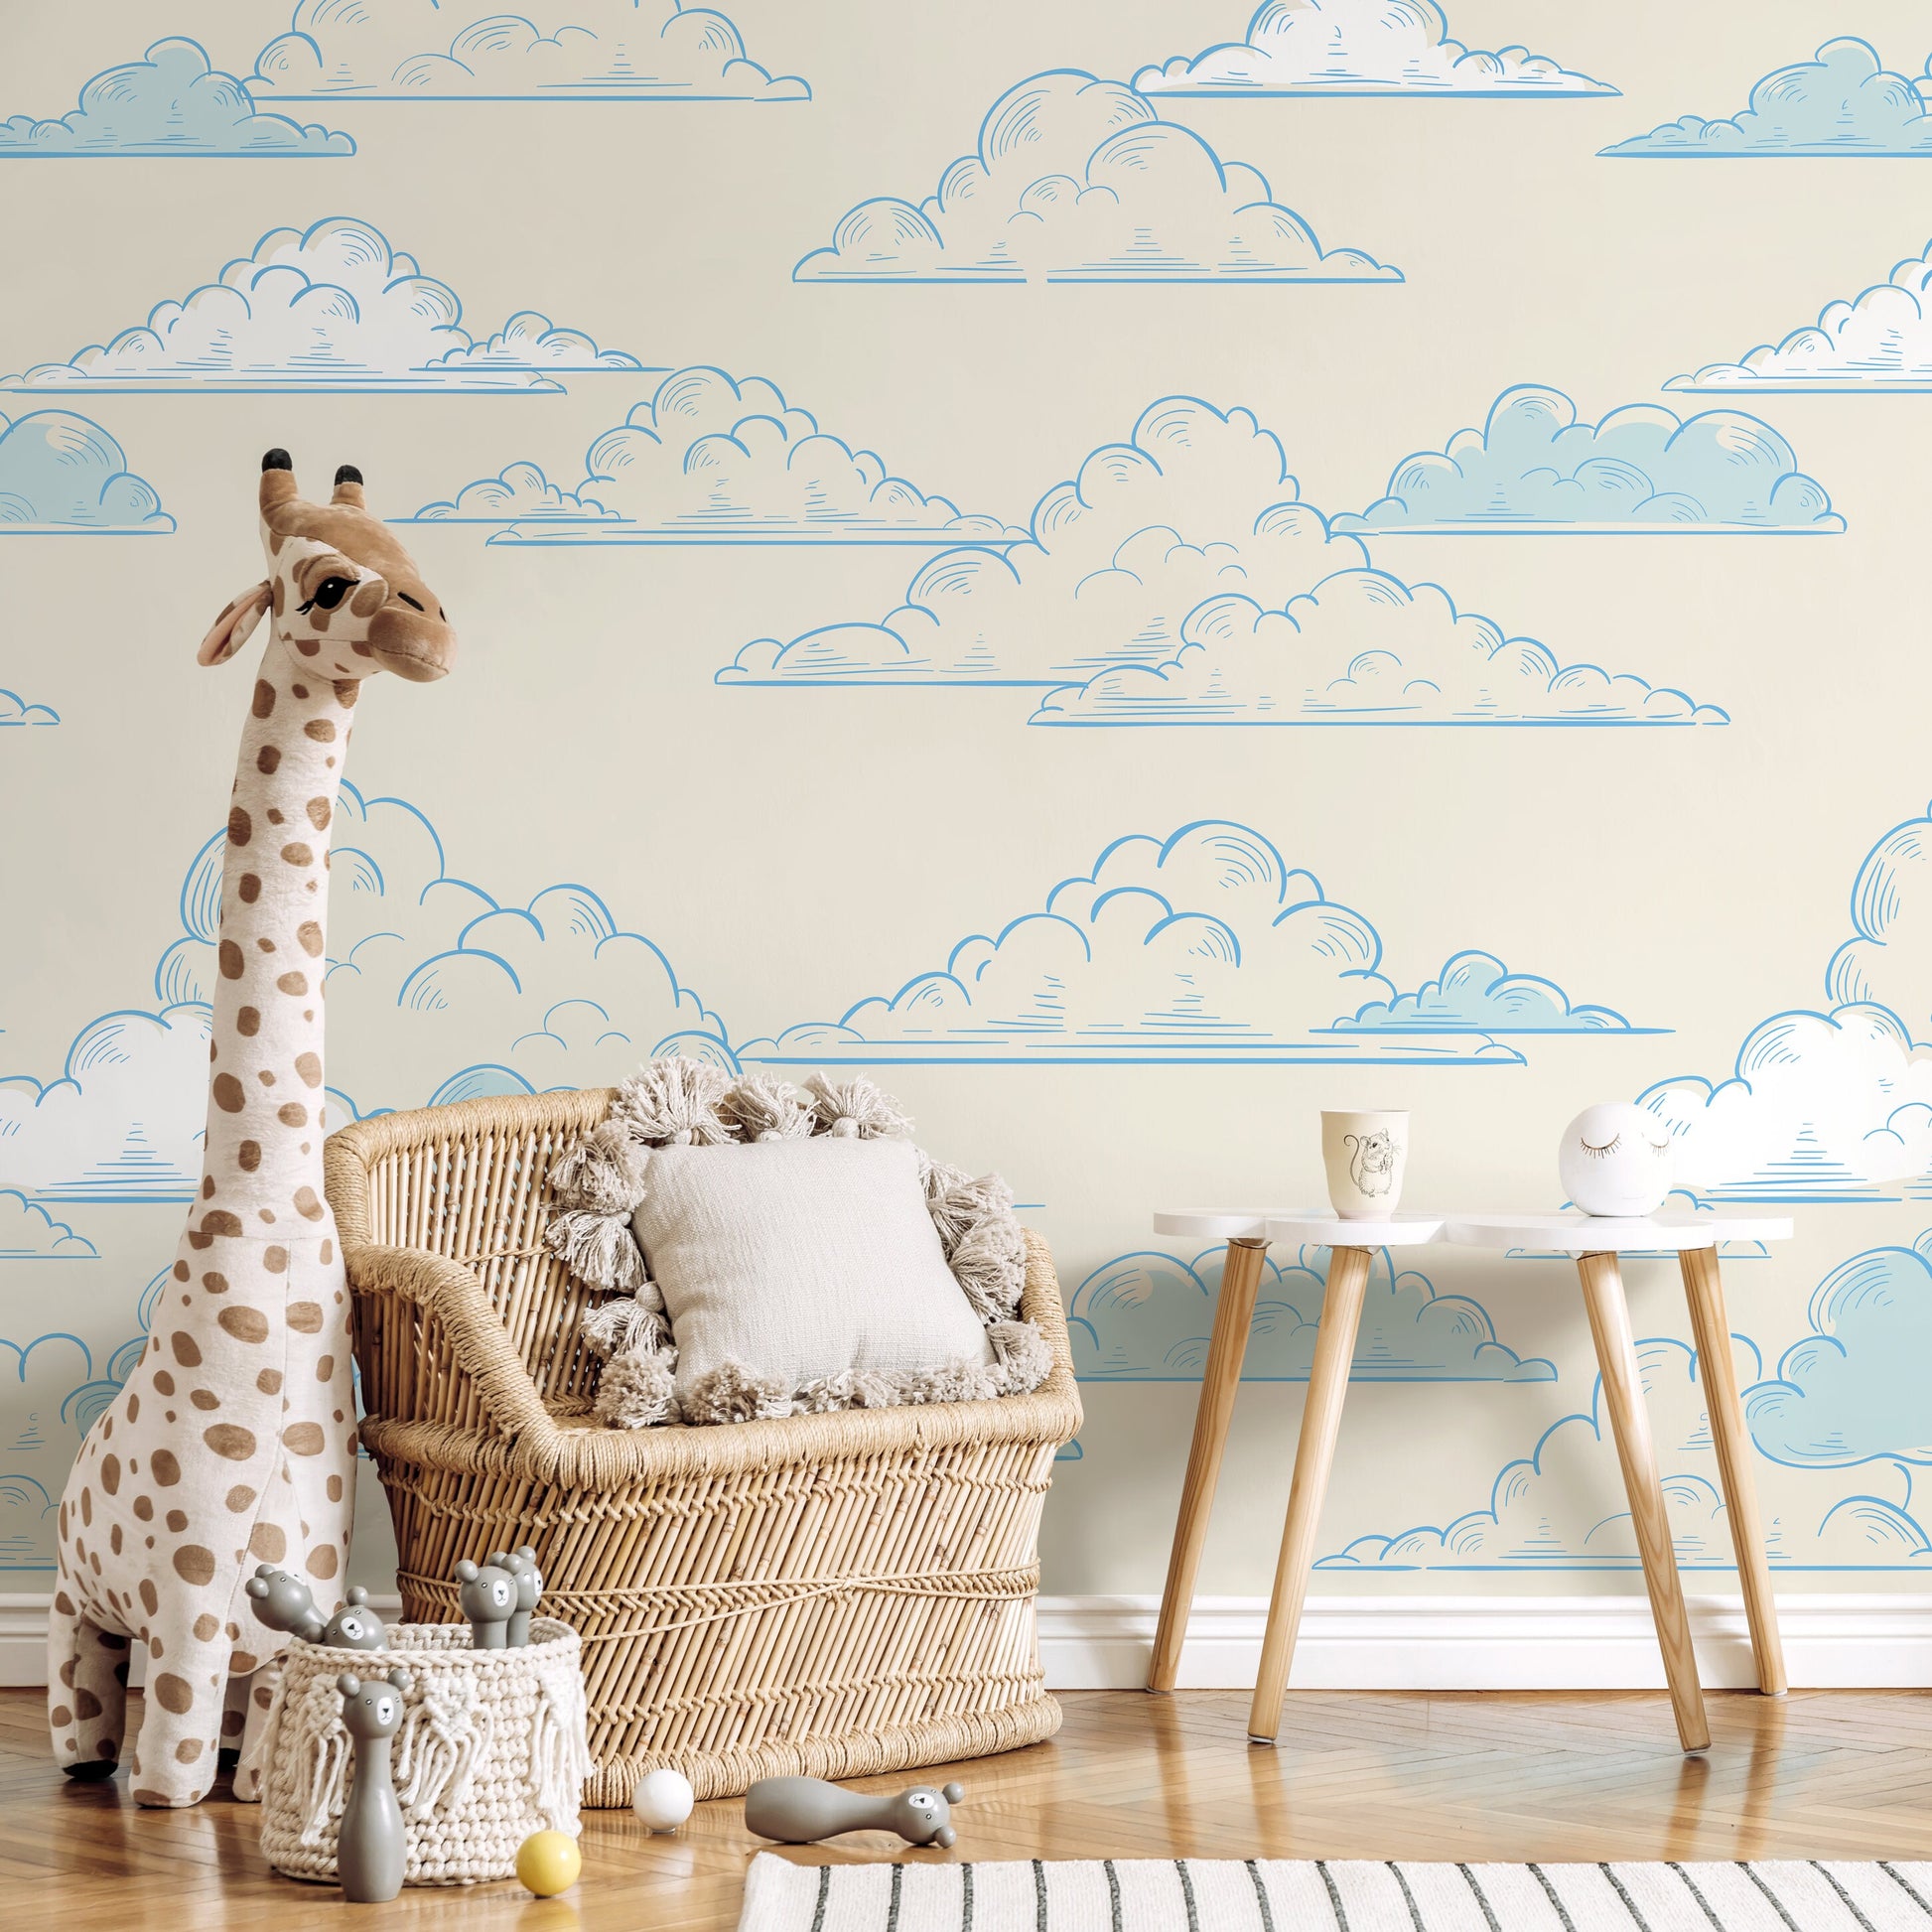 Removable Wallpaper Peel and Stick Wallpaper Wall Paper Wall Mural - Clouds Wallpaper - A579